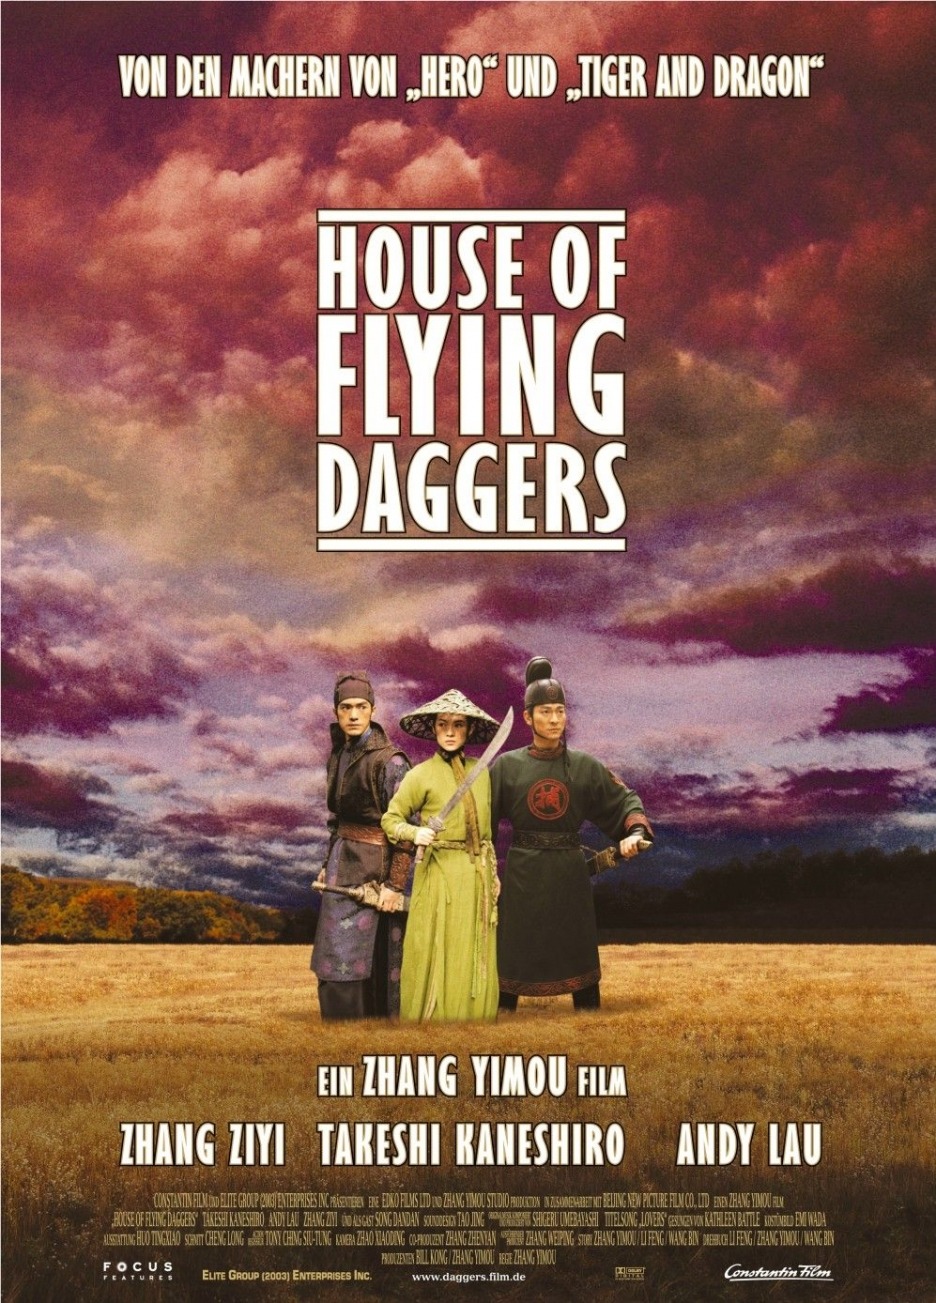 House of Flying Daggers